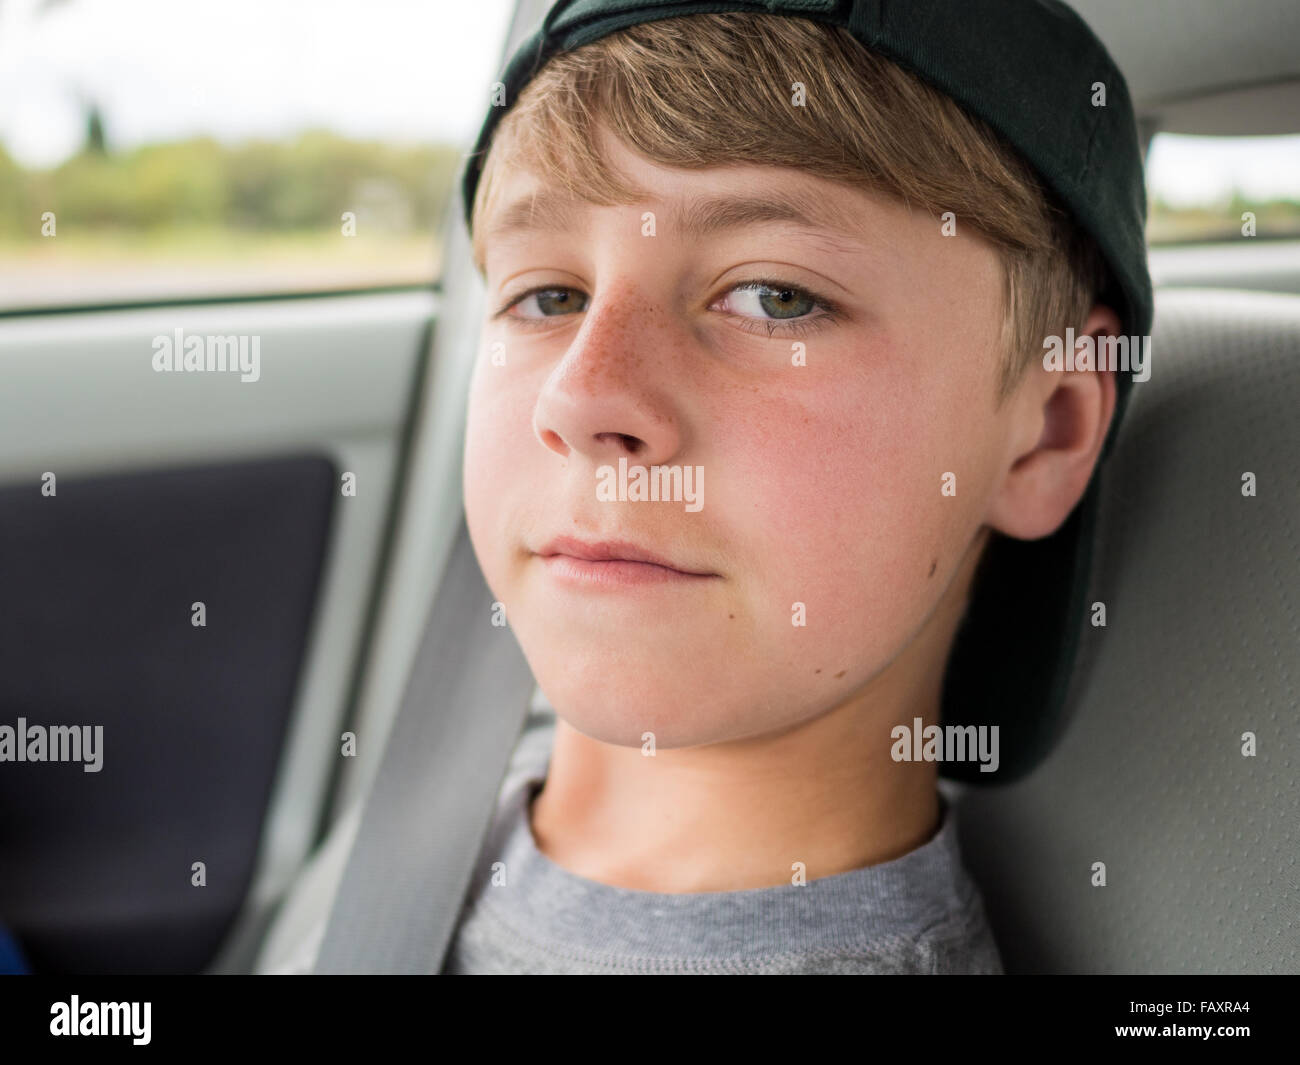 Close up portrait of casual teenage boy with backwards hat Stock Photo